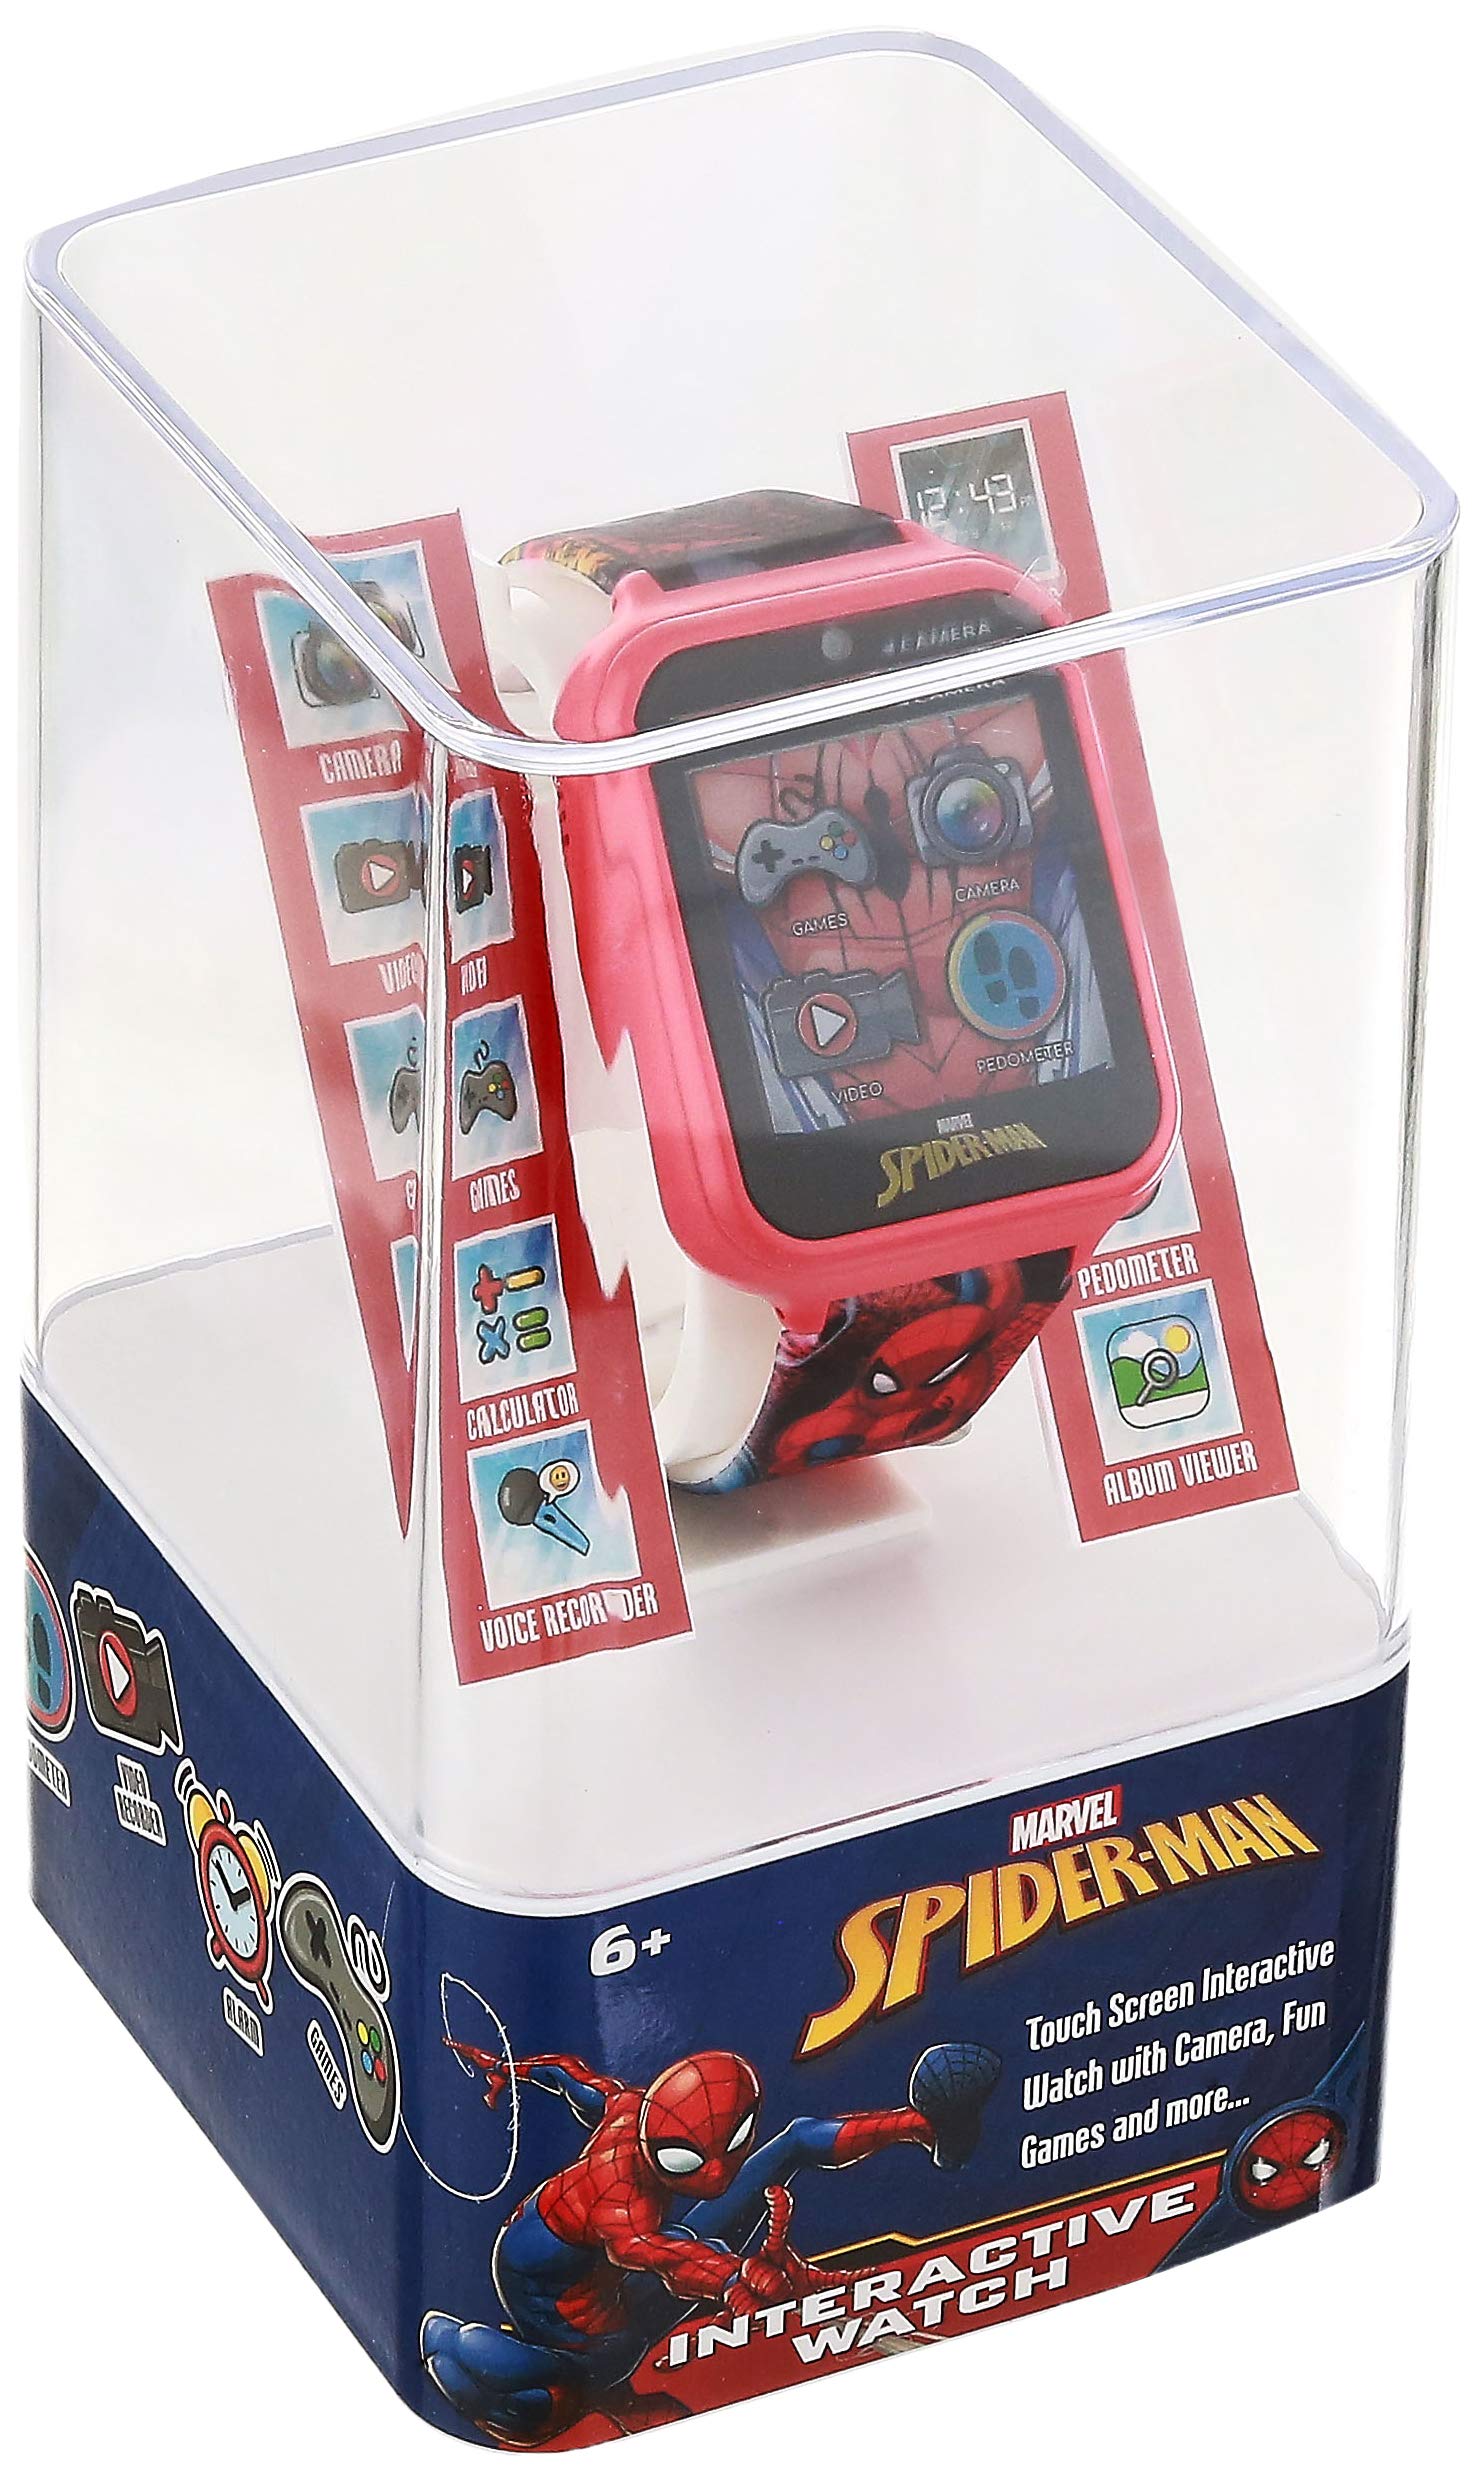 Accutime Kids Marvel Spider-Man Red Educational Touchscreen Smart Watch Toy for Boys, Girls, Toddlers - Selfie Cam, Learning Games, Alarm, Calculator, Pedometer, and More (Model: SPD4667AZ)